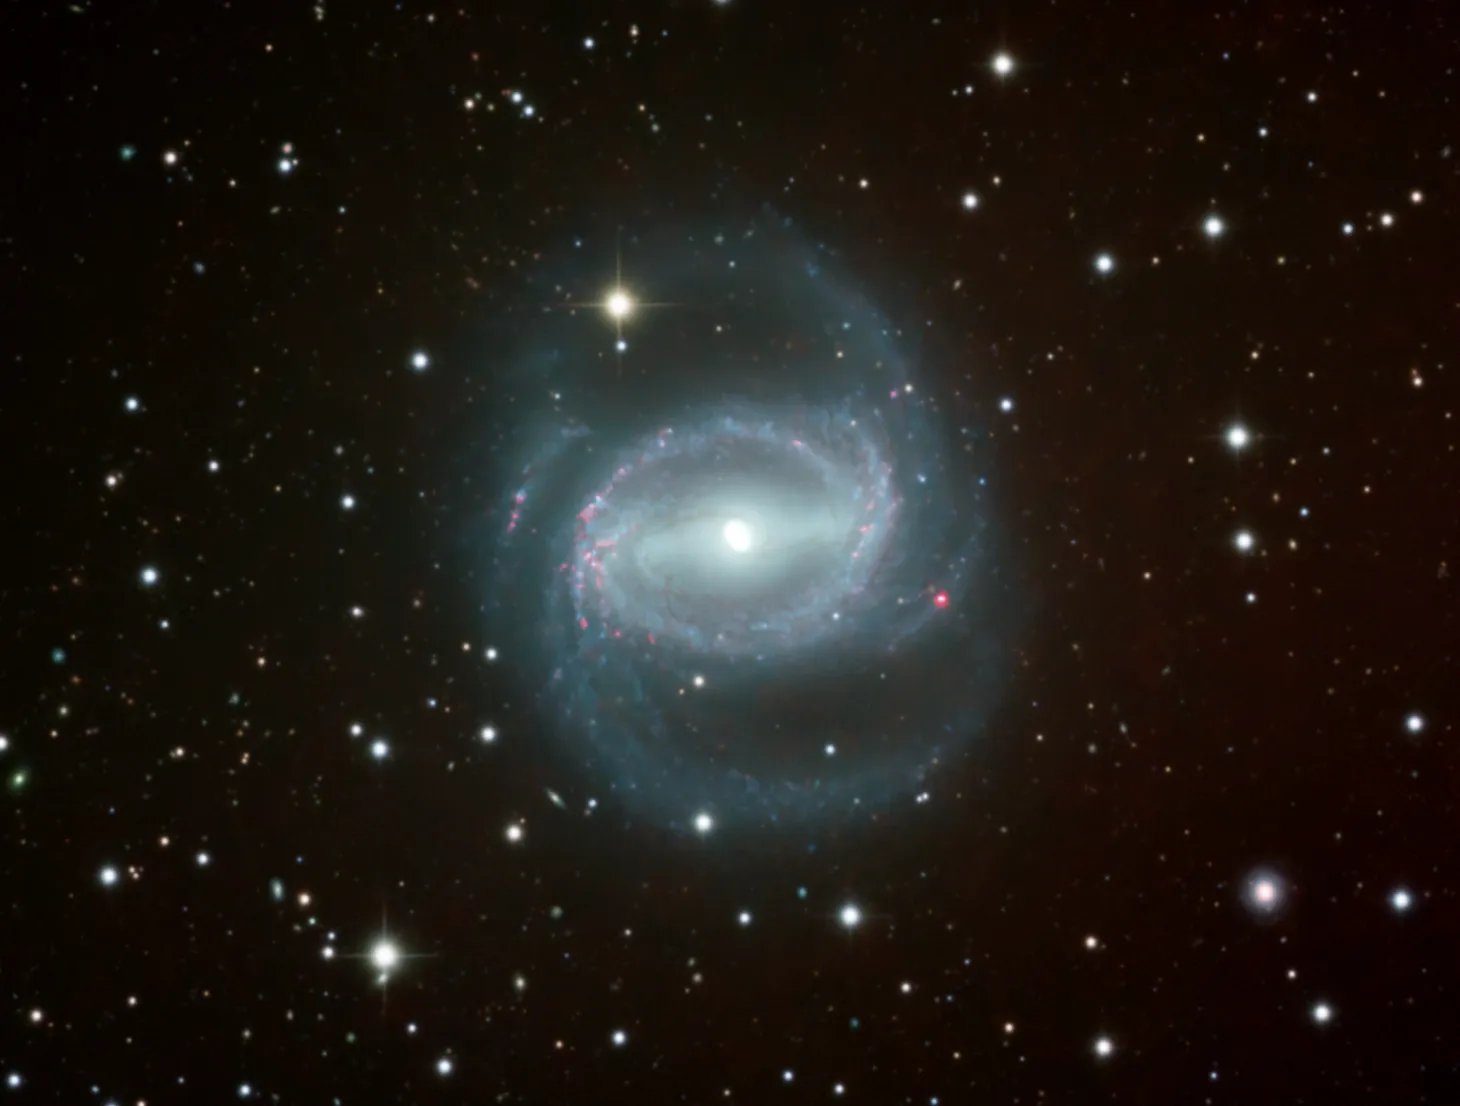 Barred spiral galaxy NGC 1433 processed by Ozark Hills Observatory